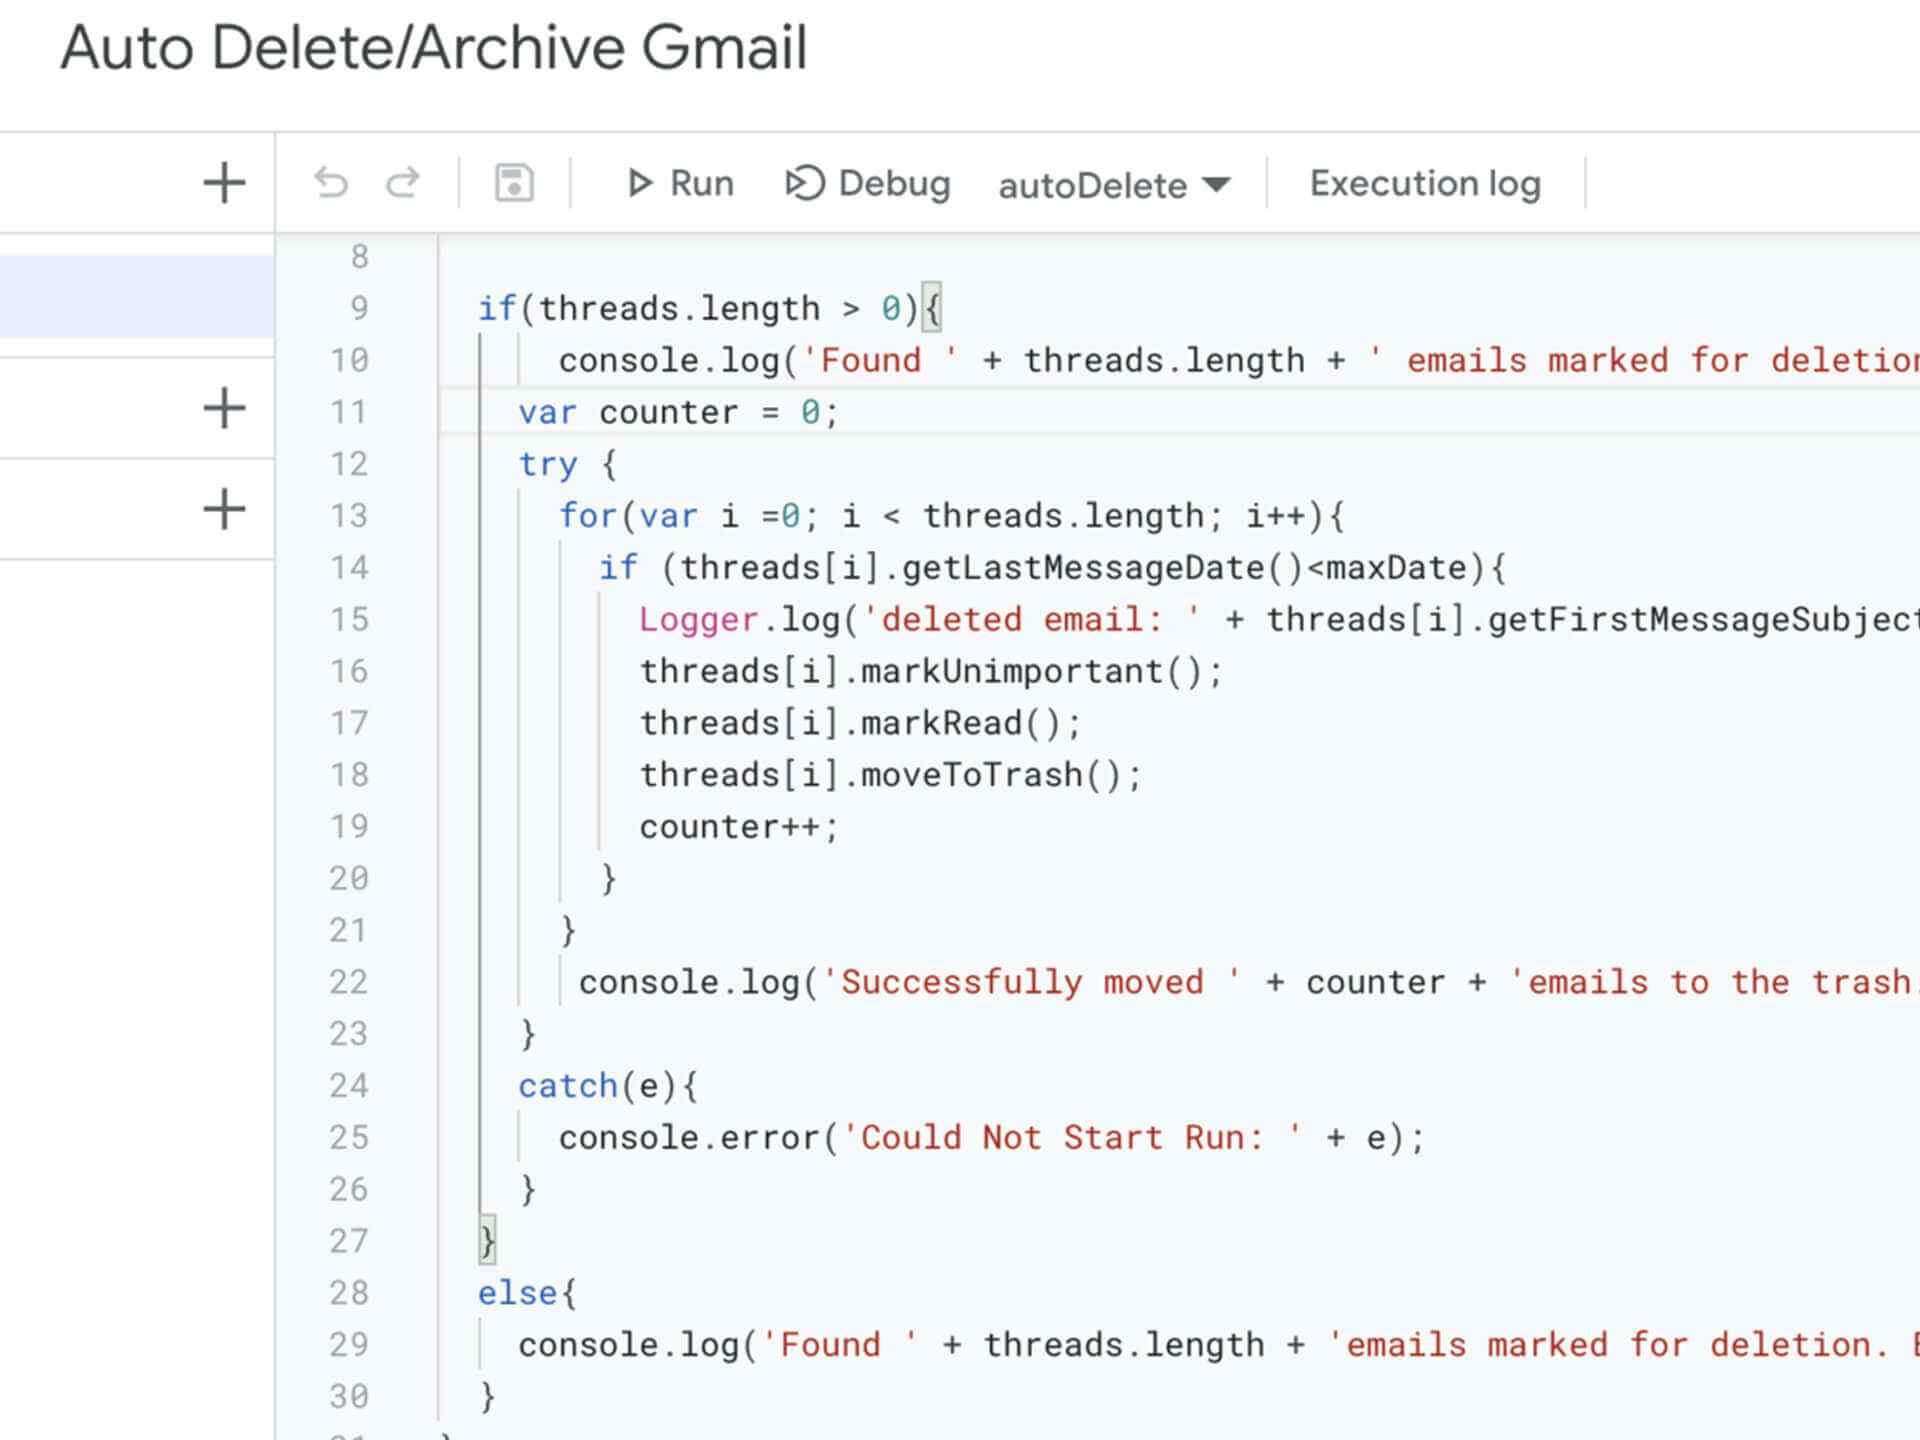 Gmail: Auto Delete/Archive Emails After a Set Number of Days, by Jordan Lambrecht